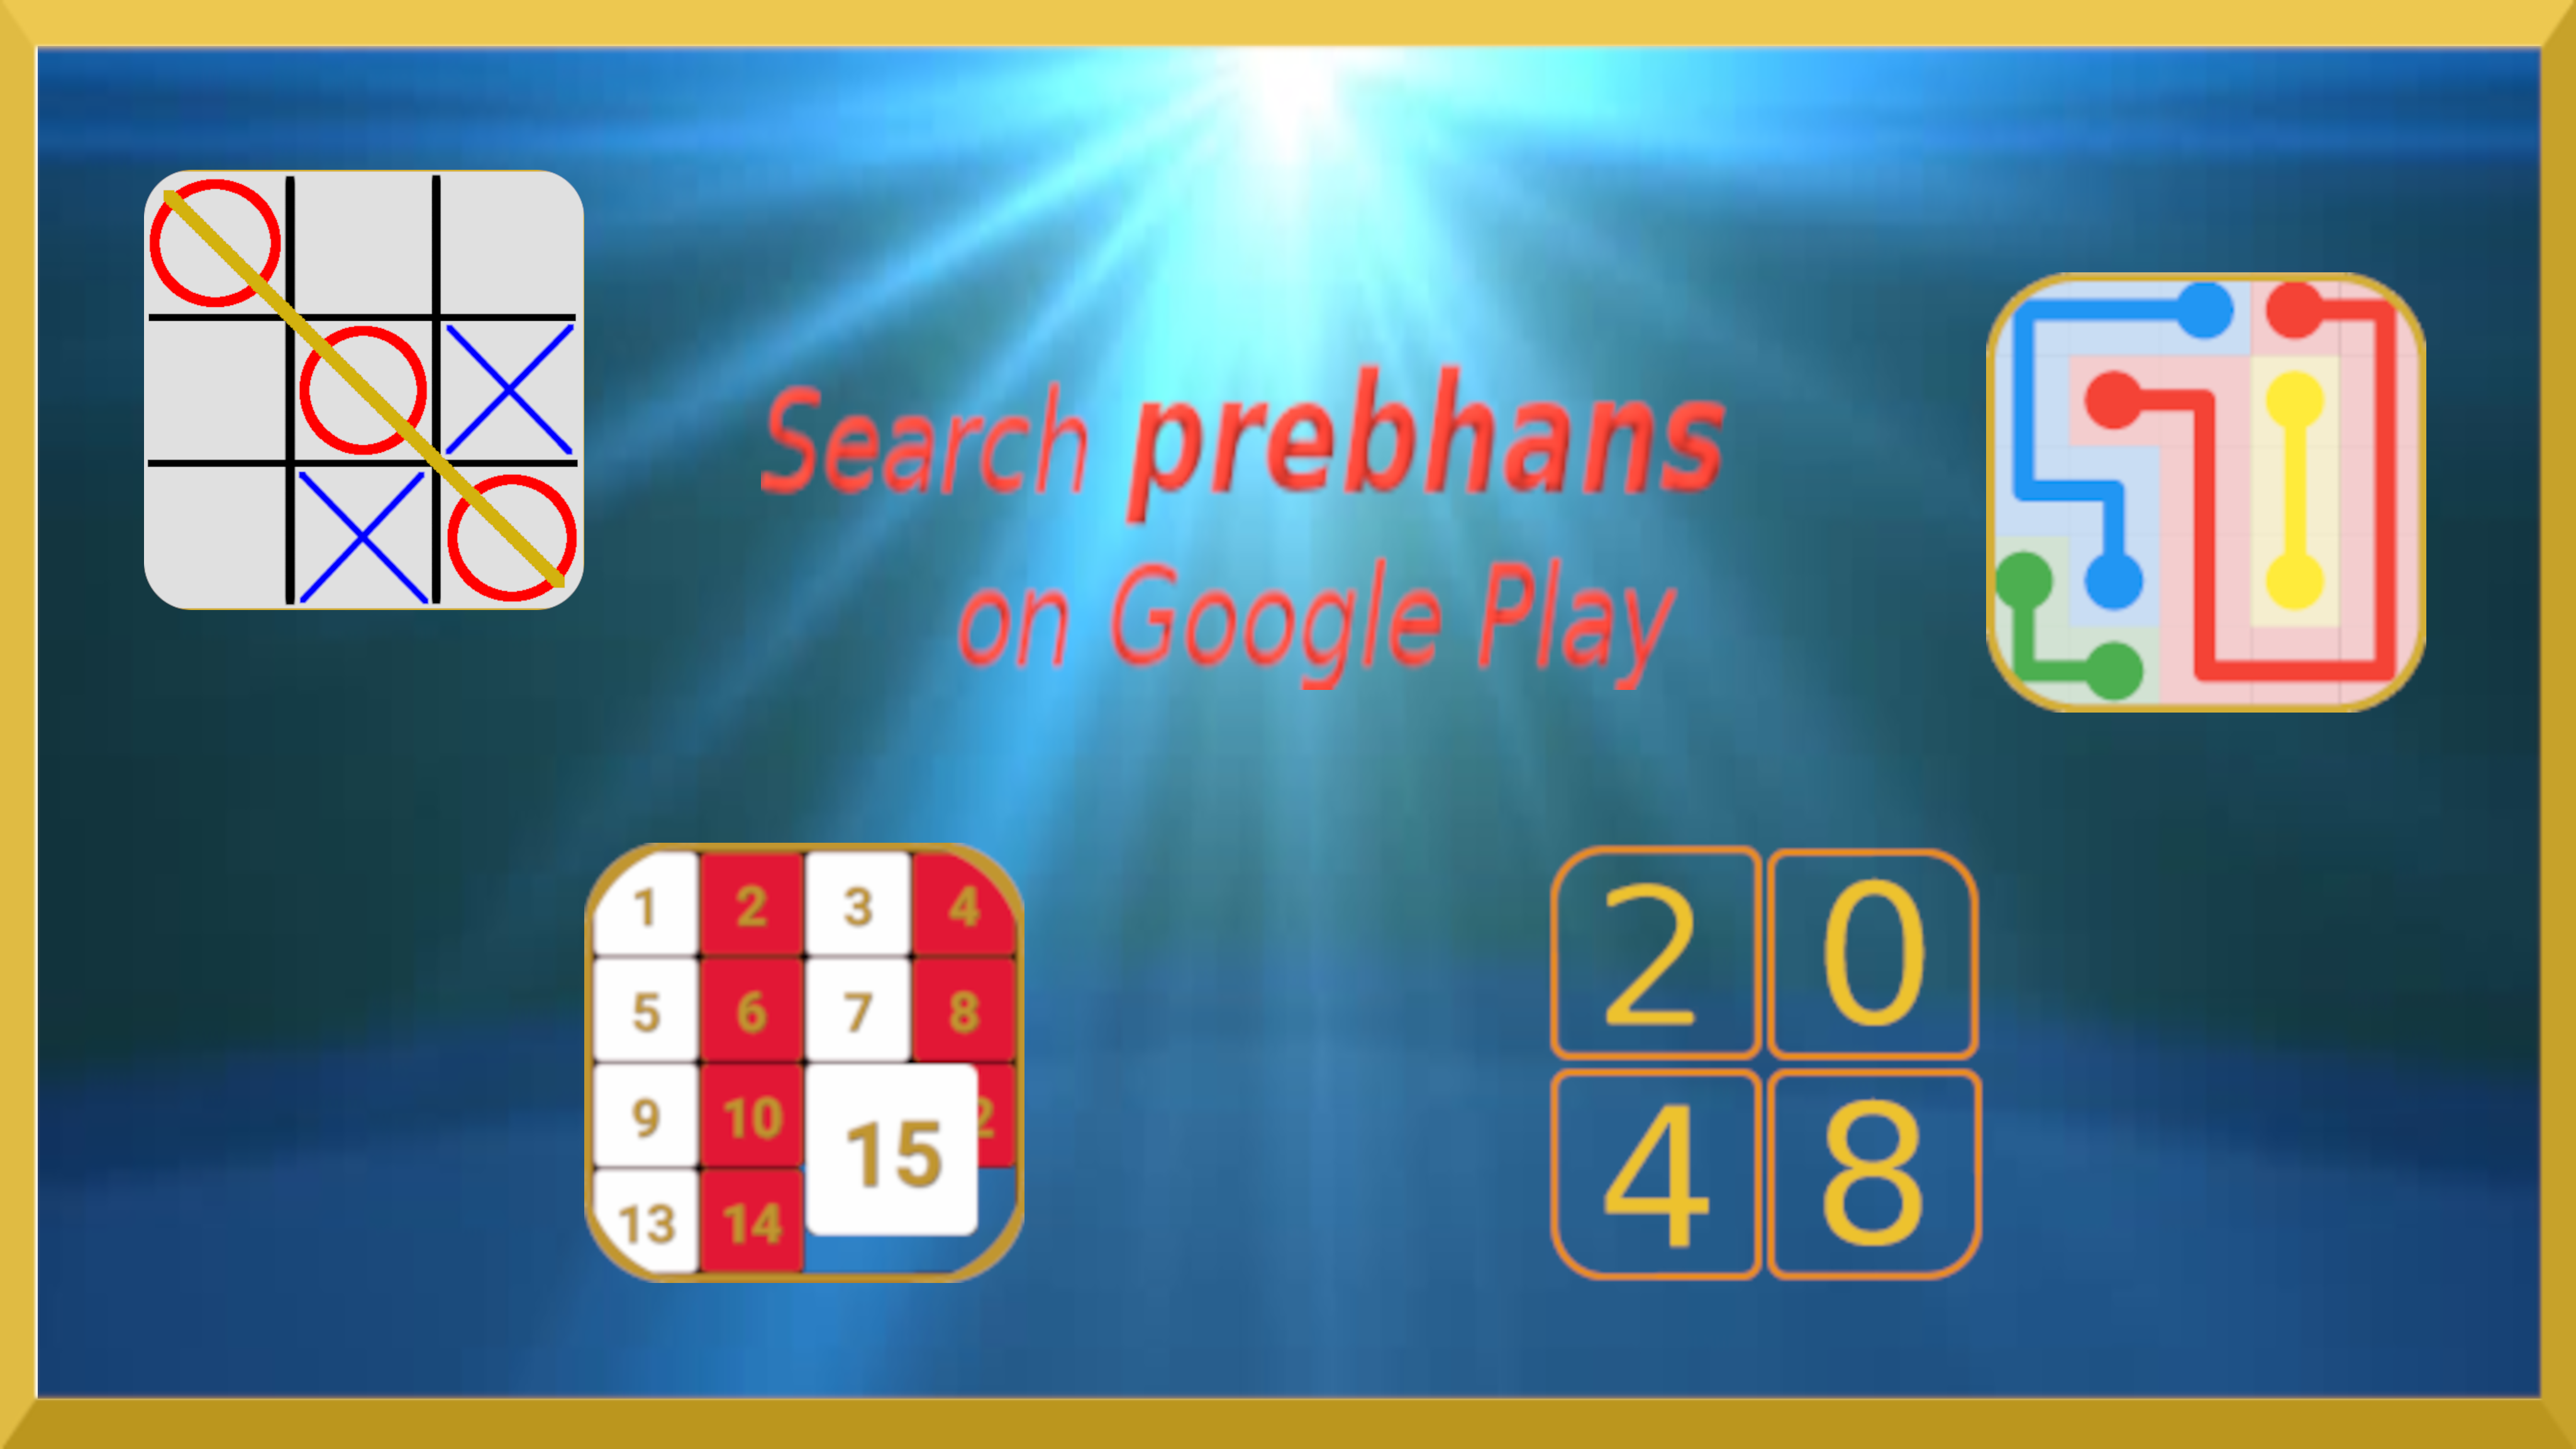 Search prebhans on Google Play